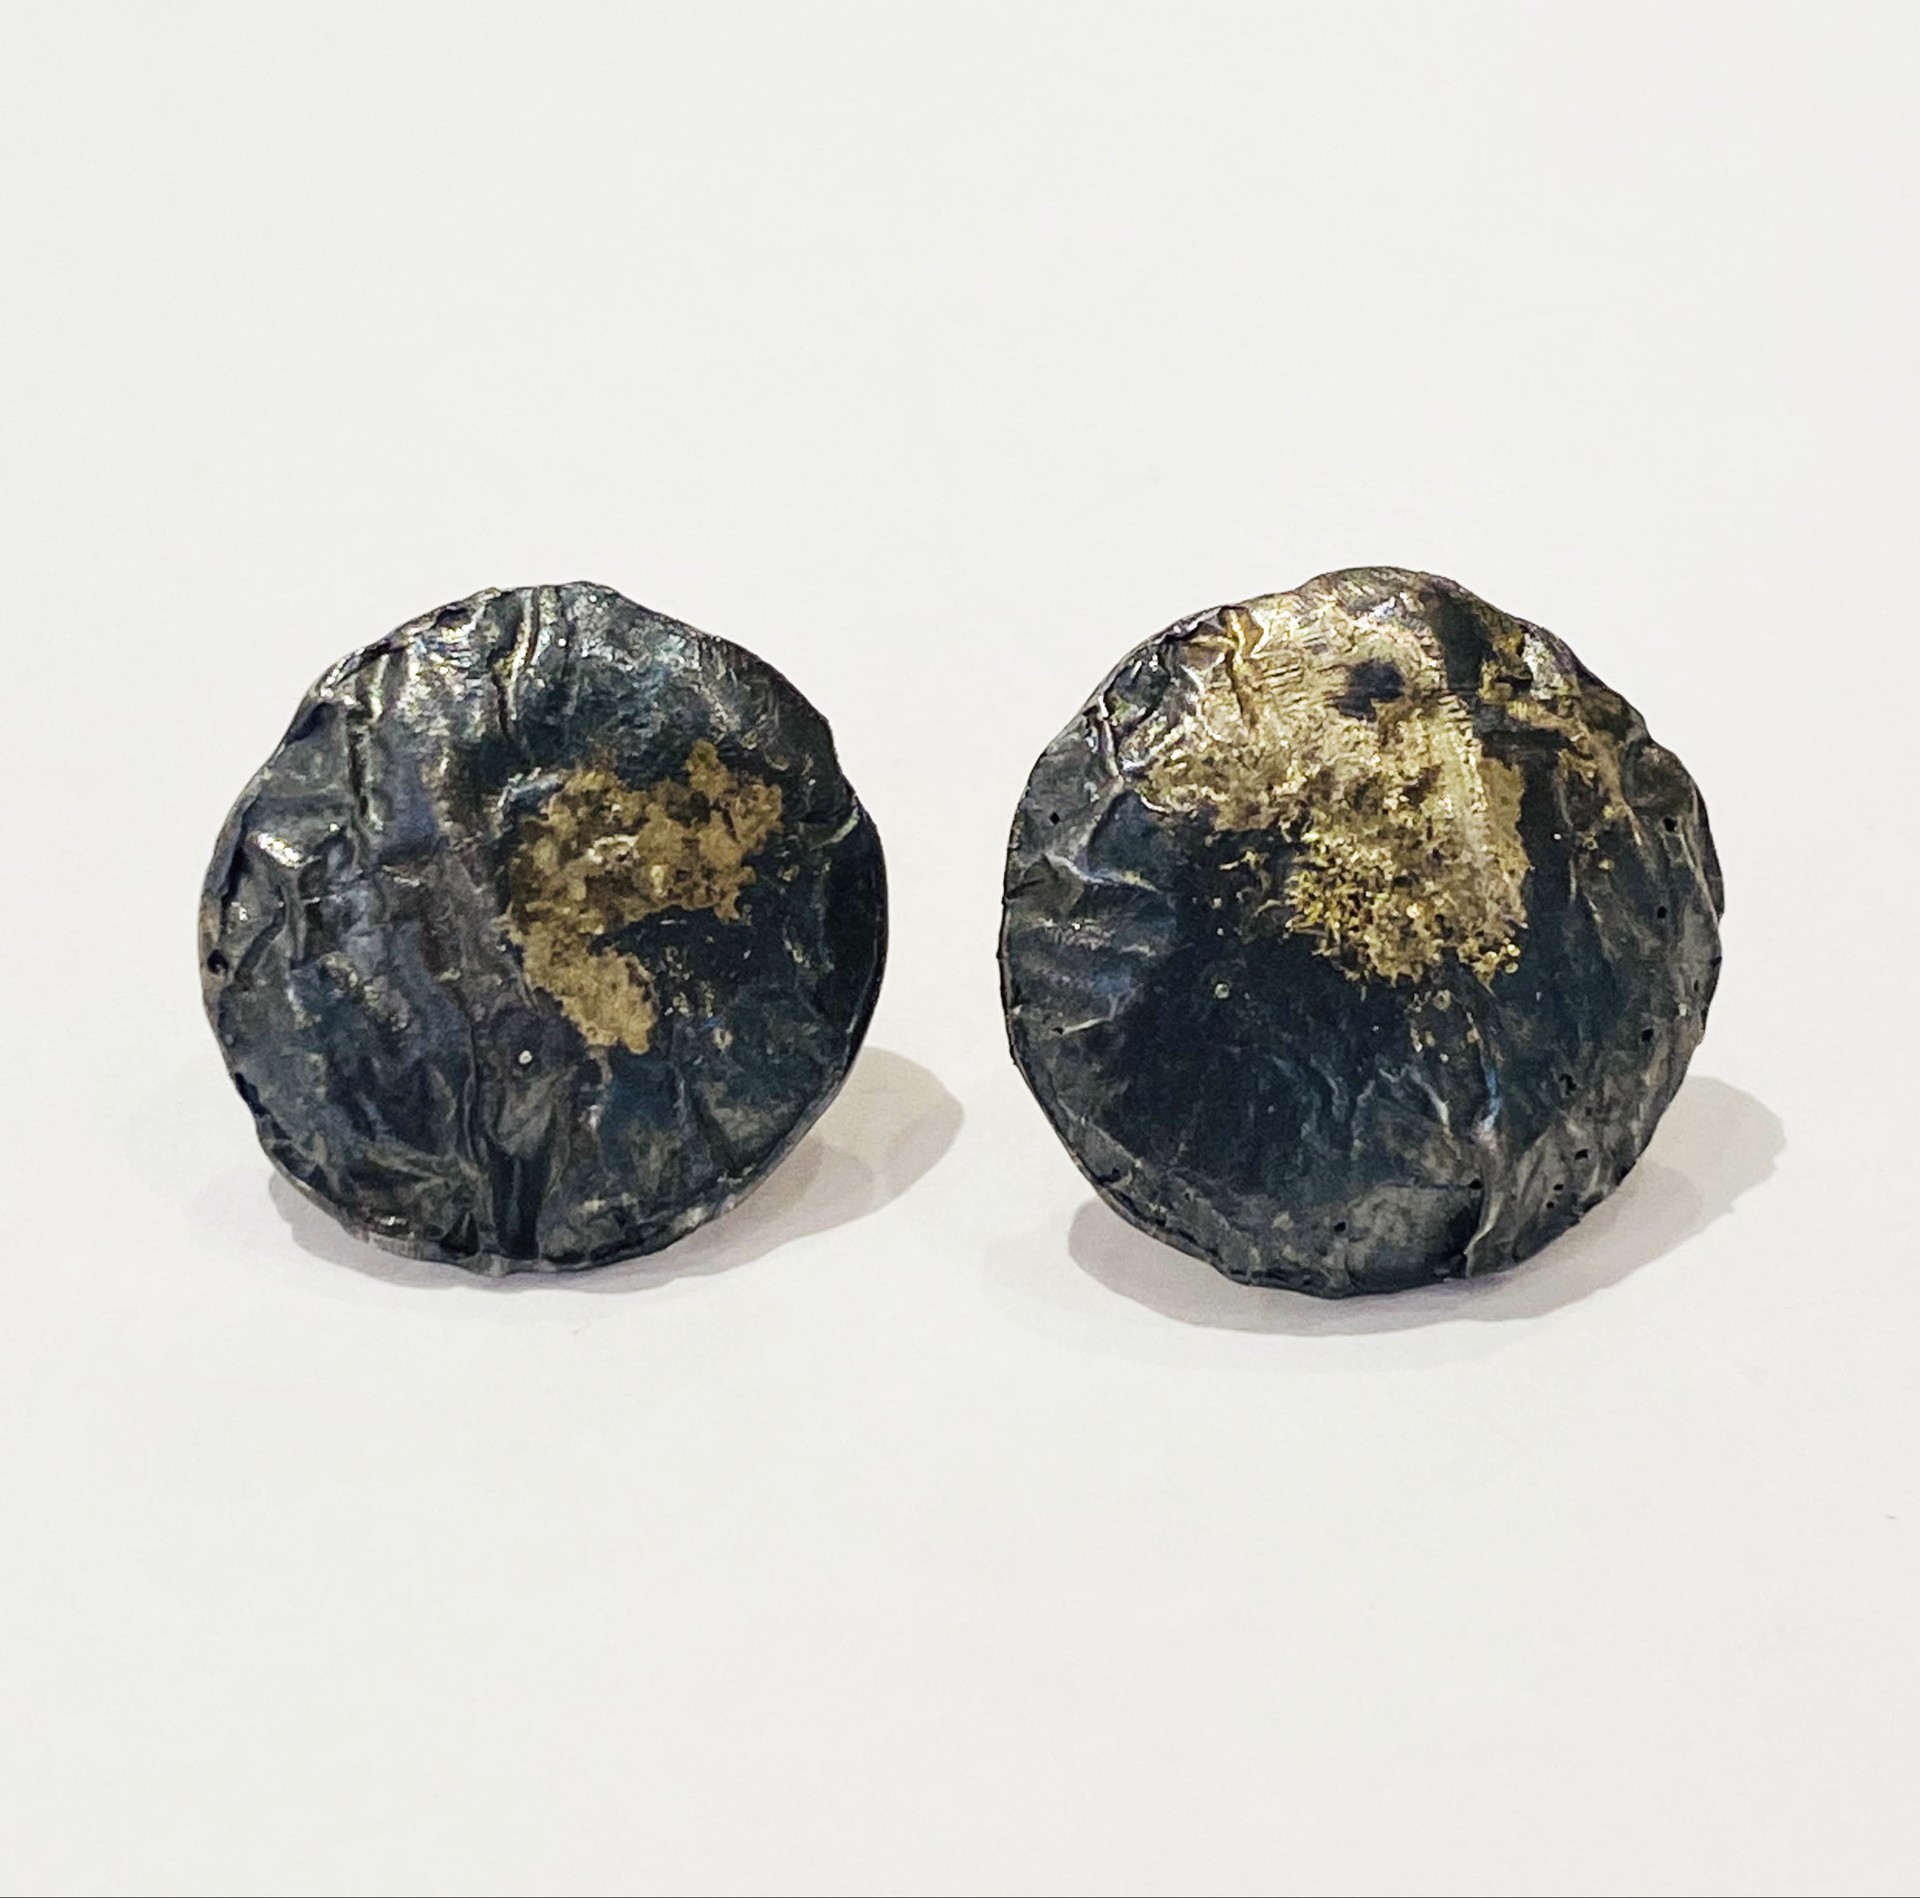 Oxidized Silver & Gold Earrings by J COTTER